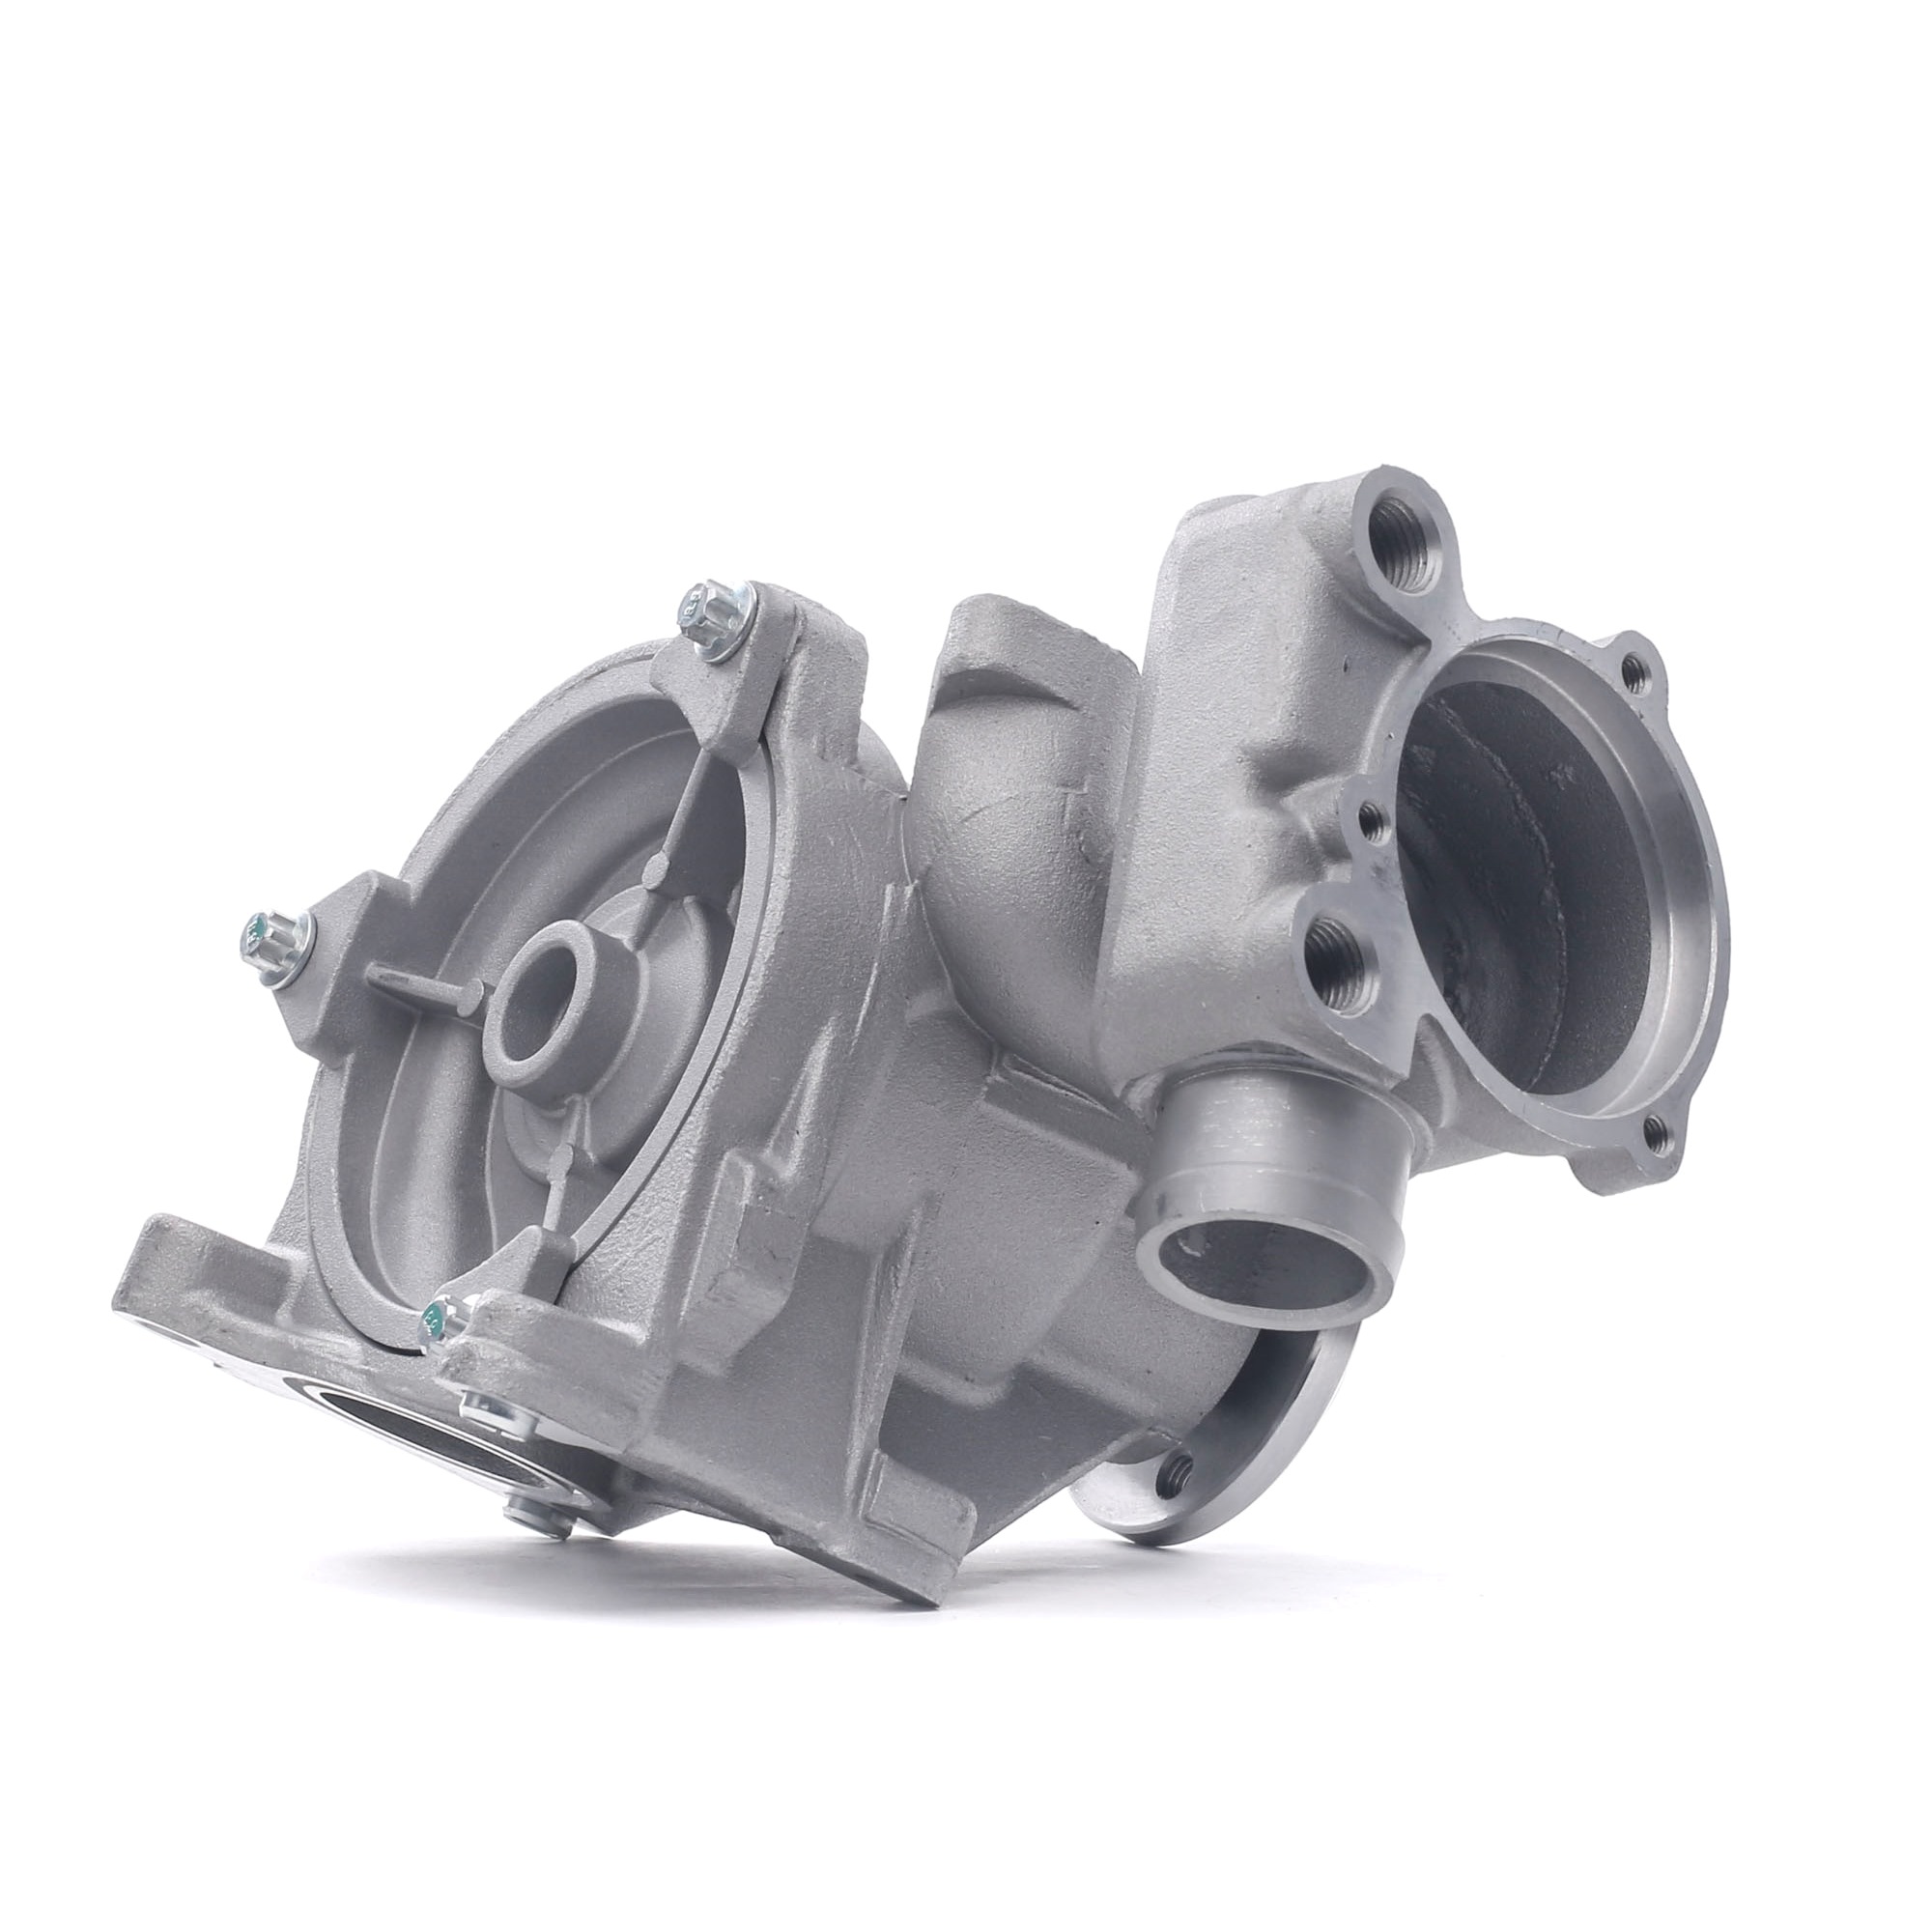 RIDEX 1260W0391 Water pump with water pump seal ring, Mechanical, Metal impeller, for v-ribbed belt use